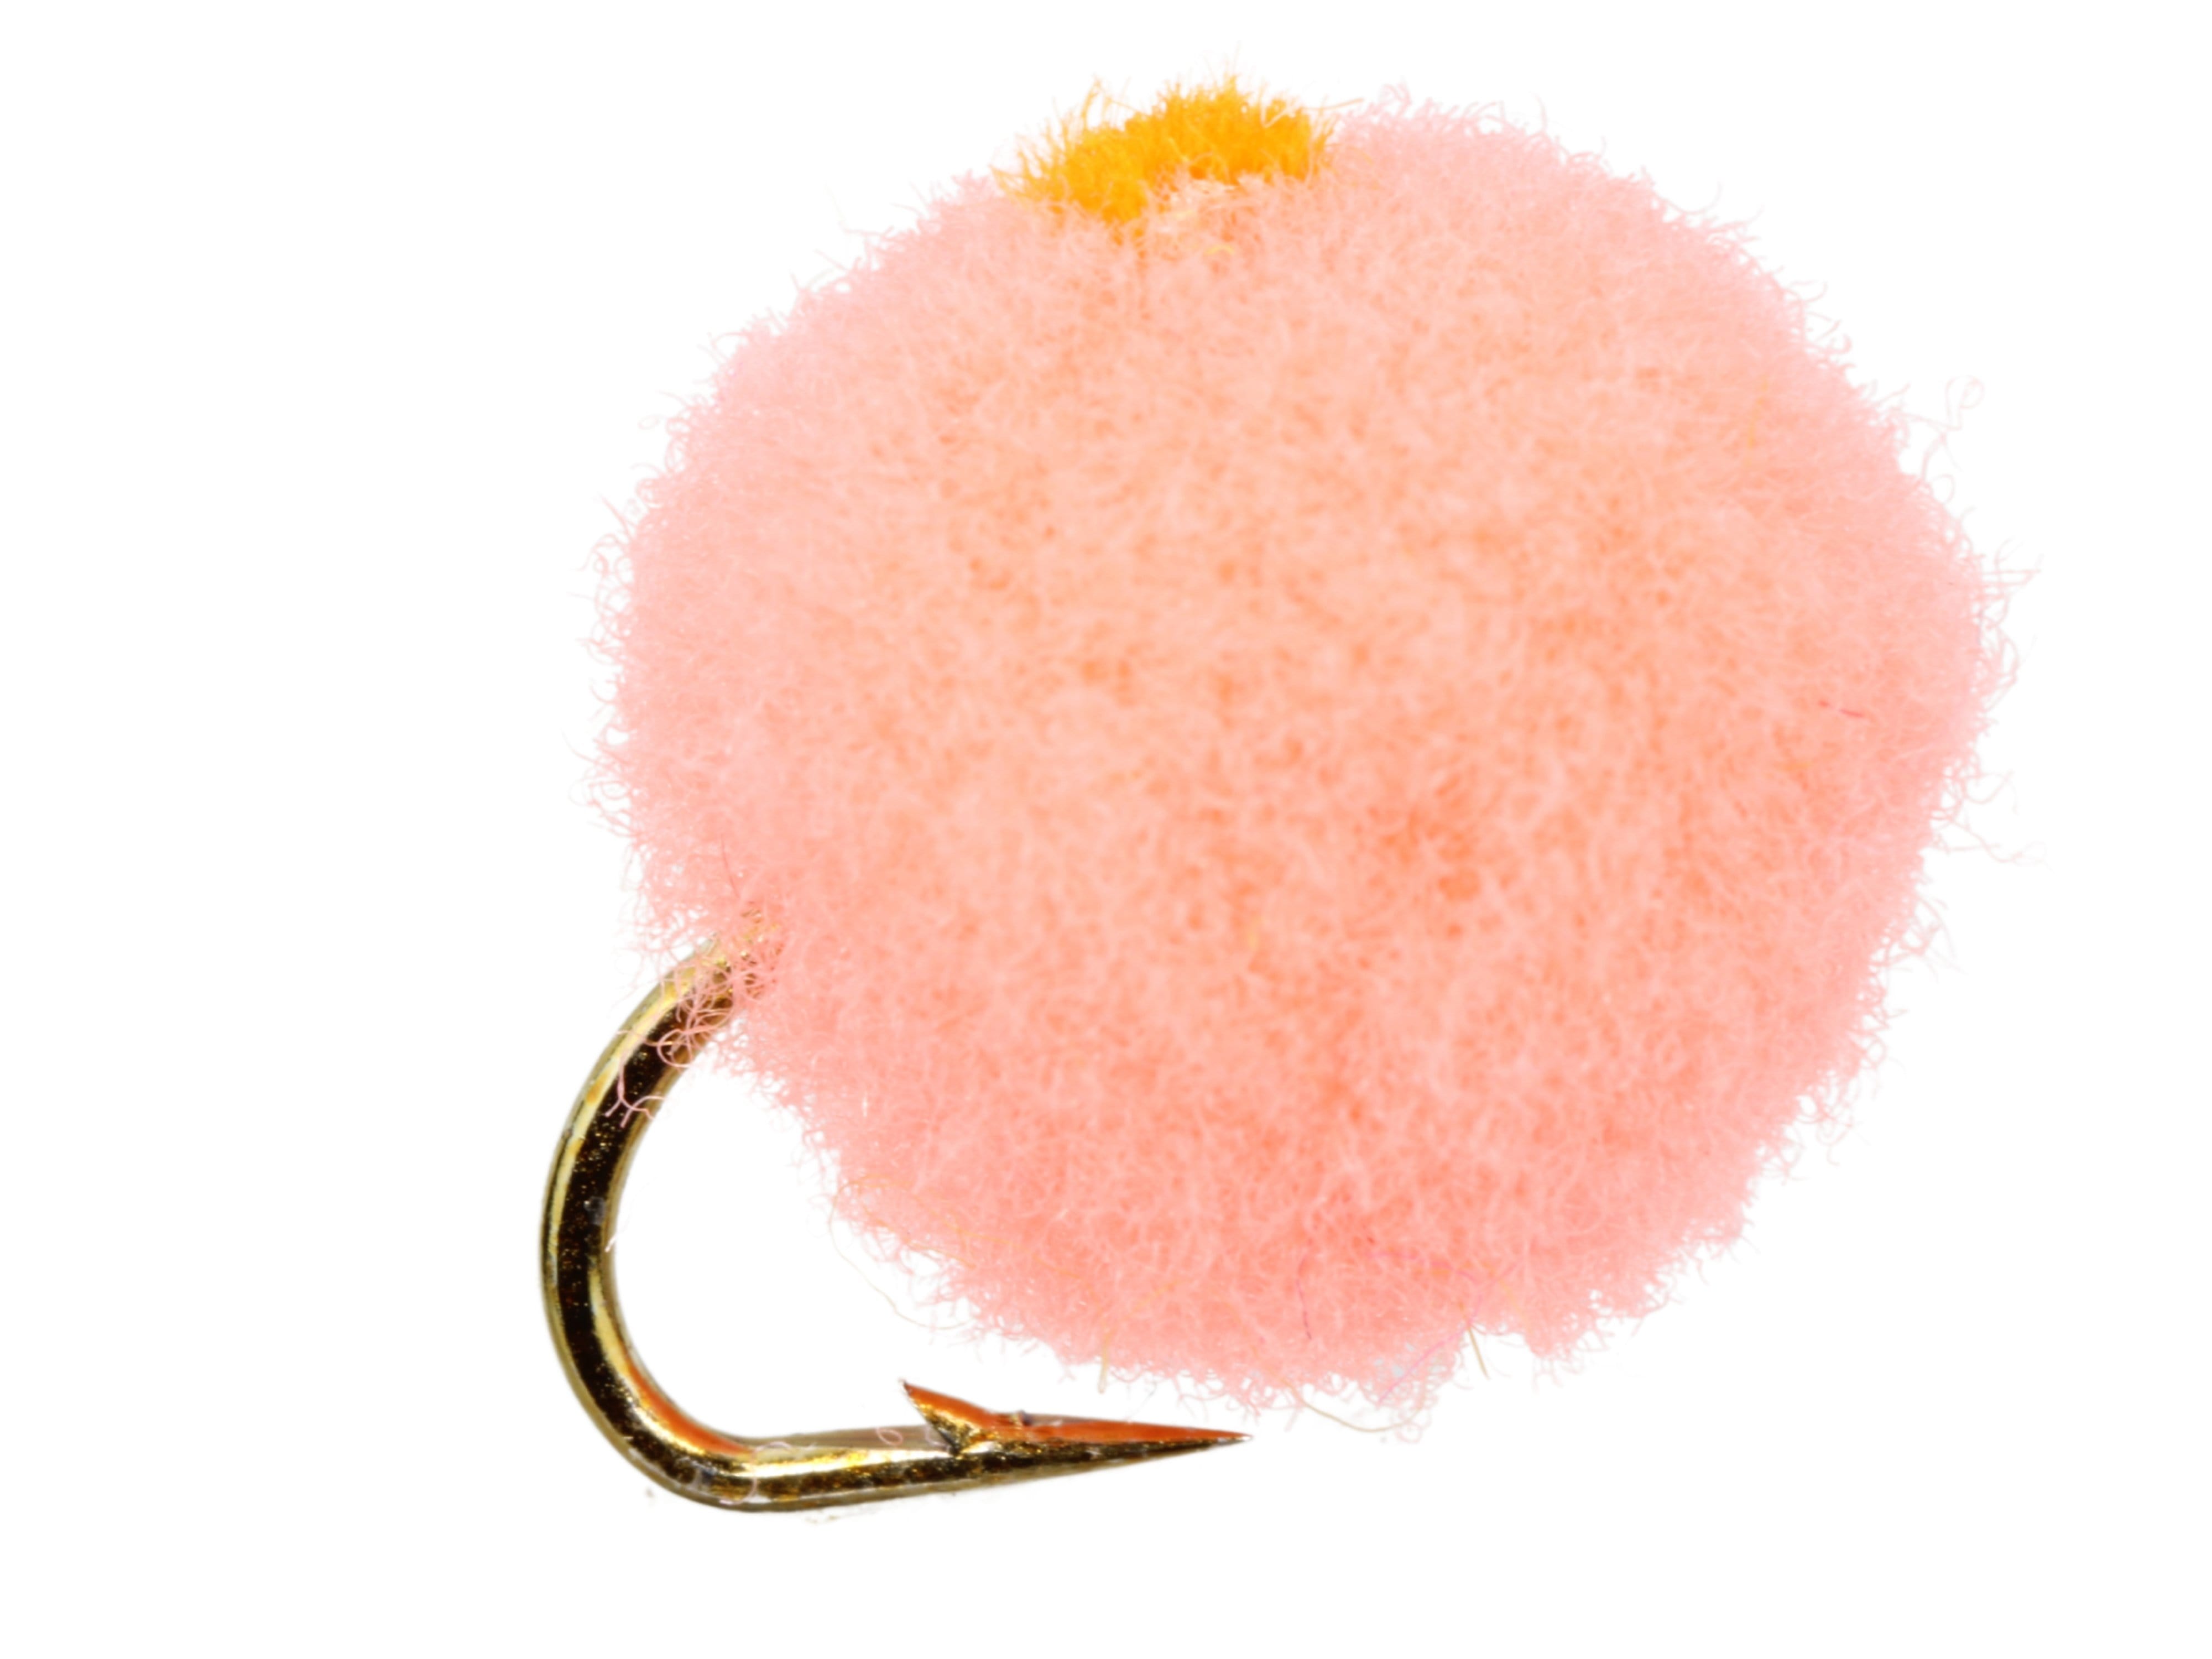 Wild Water Fly Fishing Salmon Egg with Orange Spot, Size 12, Qty. 6